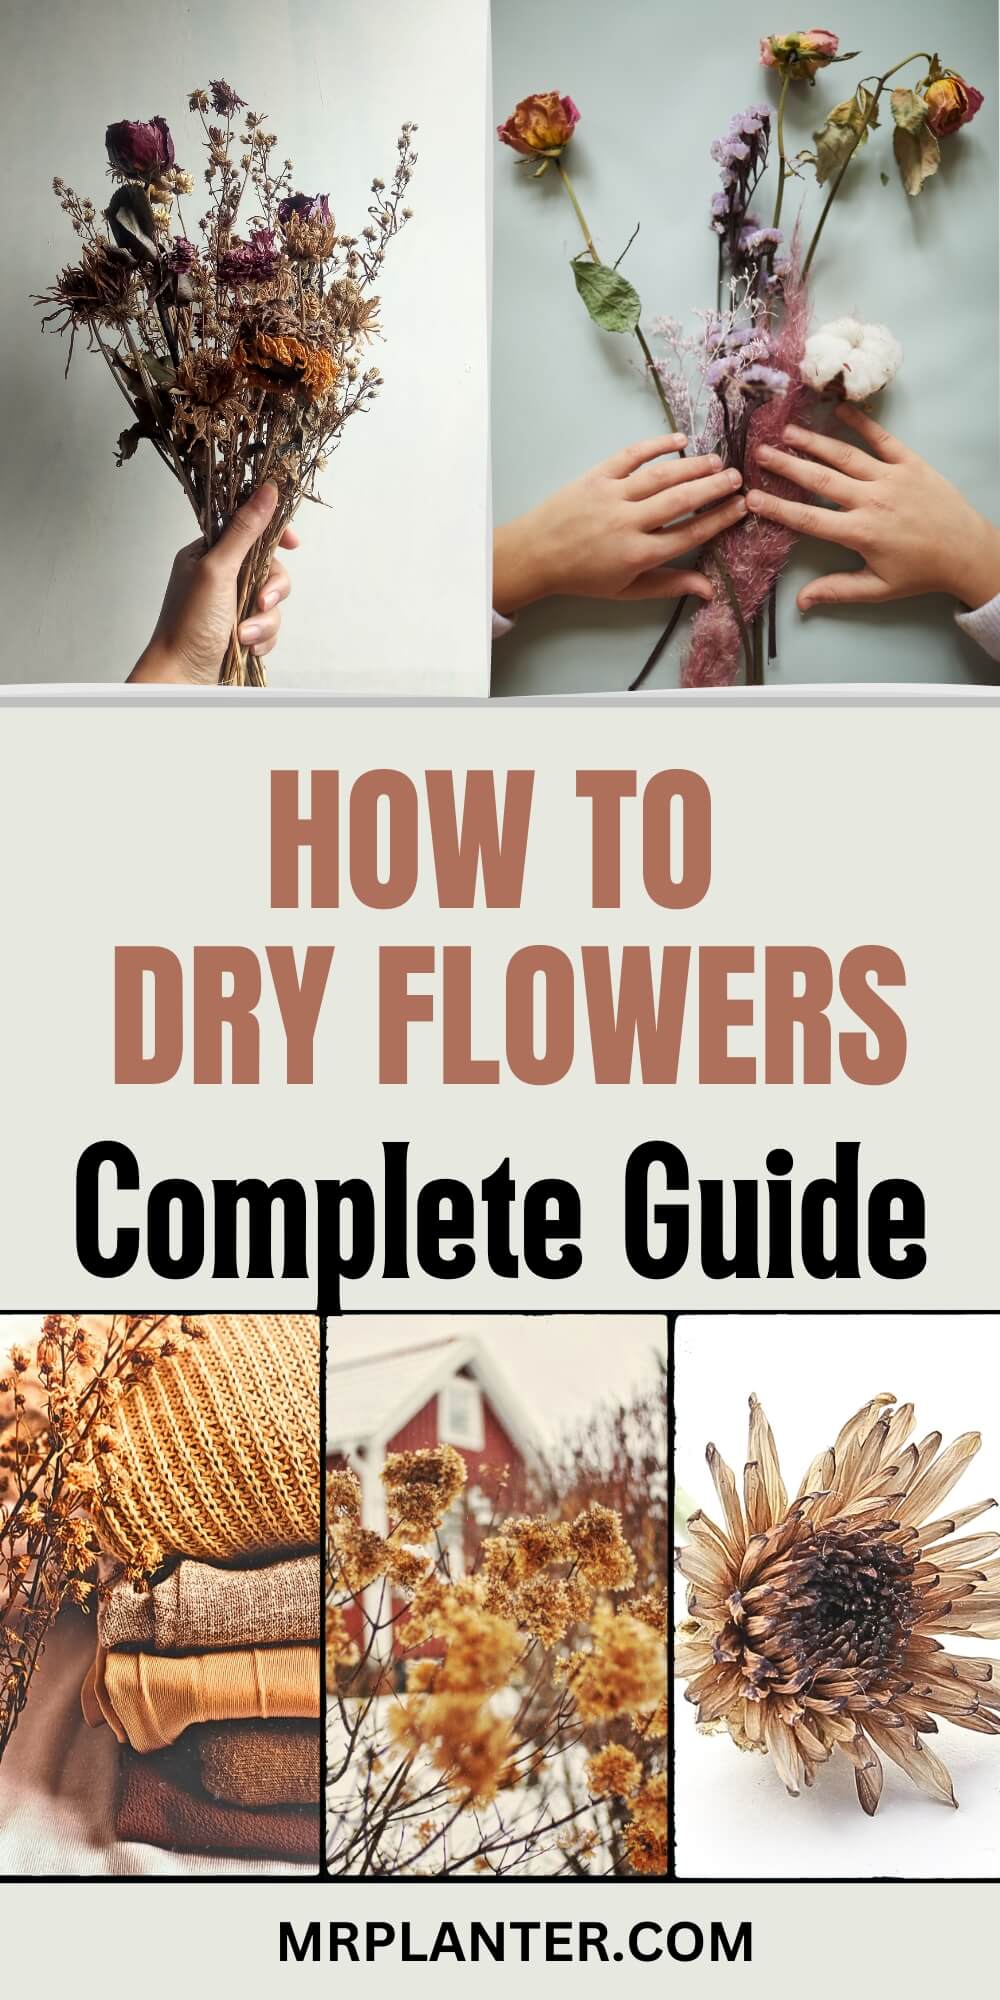 Drying flowers